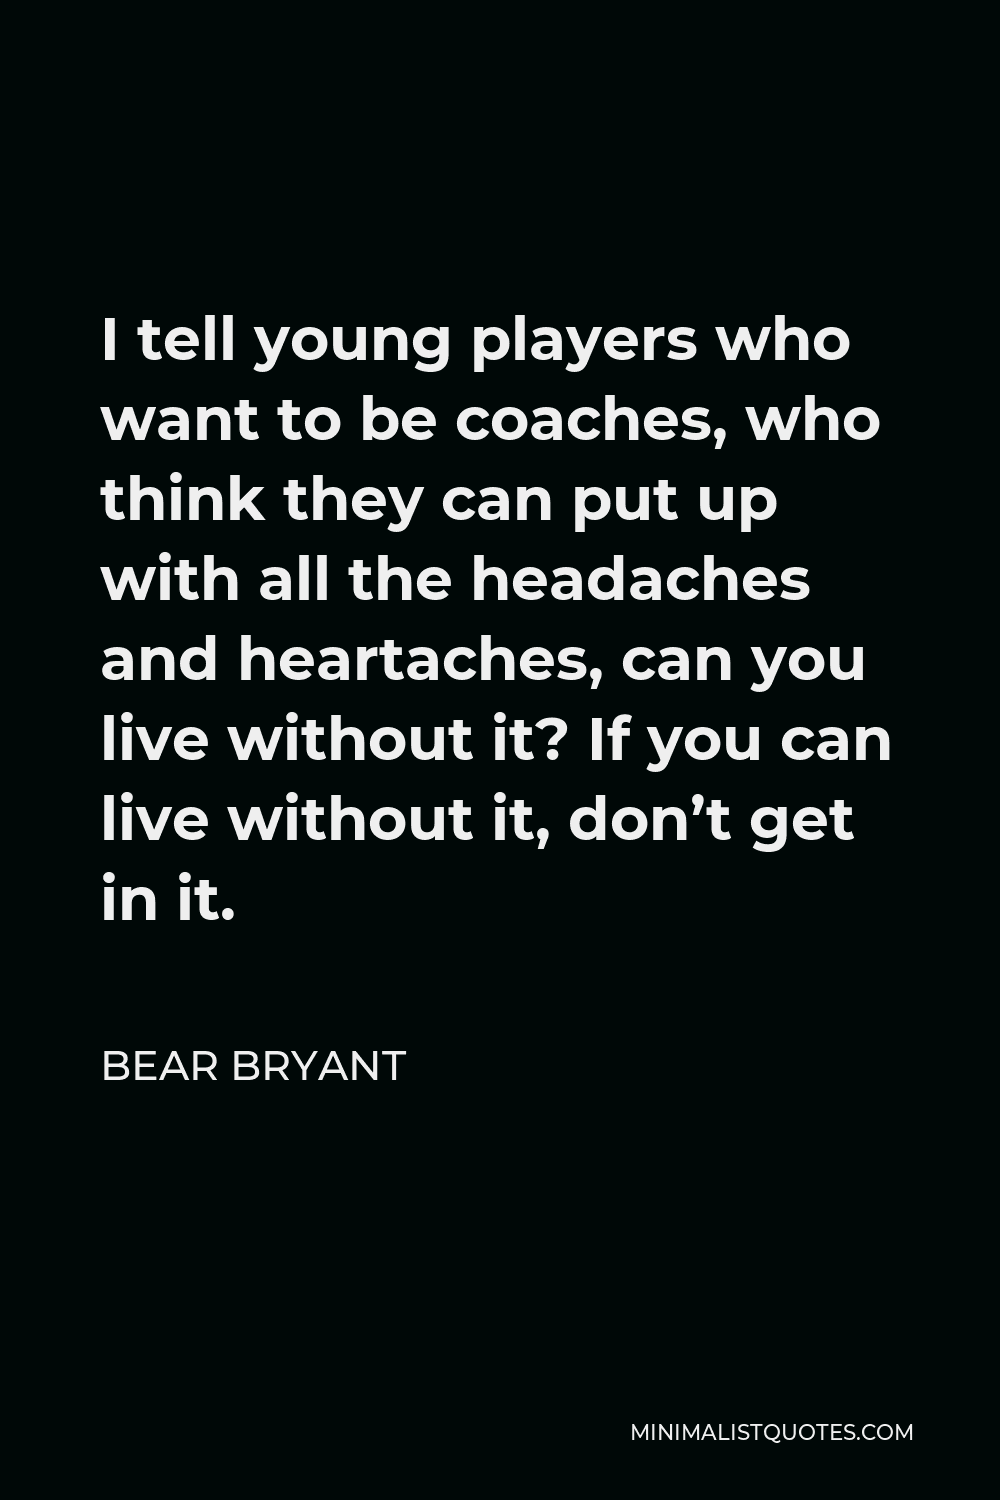 Bear Bryant Quote - I tell young players who want to be coaches, who think they can put up with all the headaches and heartaches, can you live without it? If you can live without it, don’t get in it.